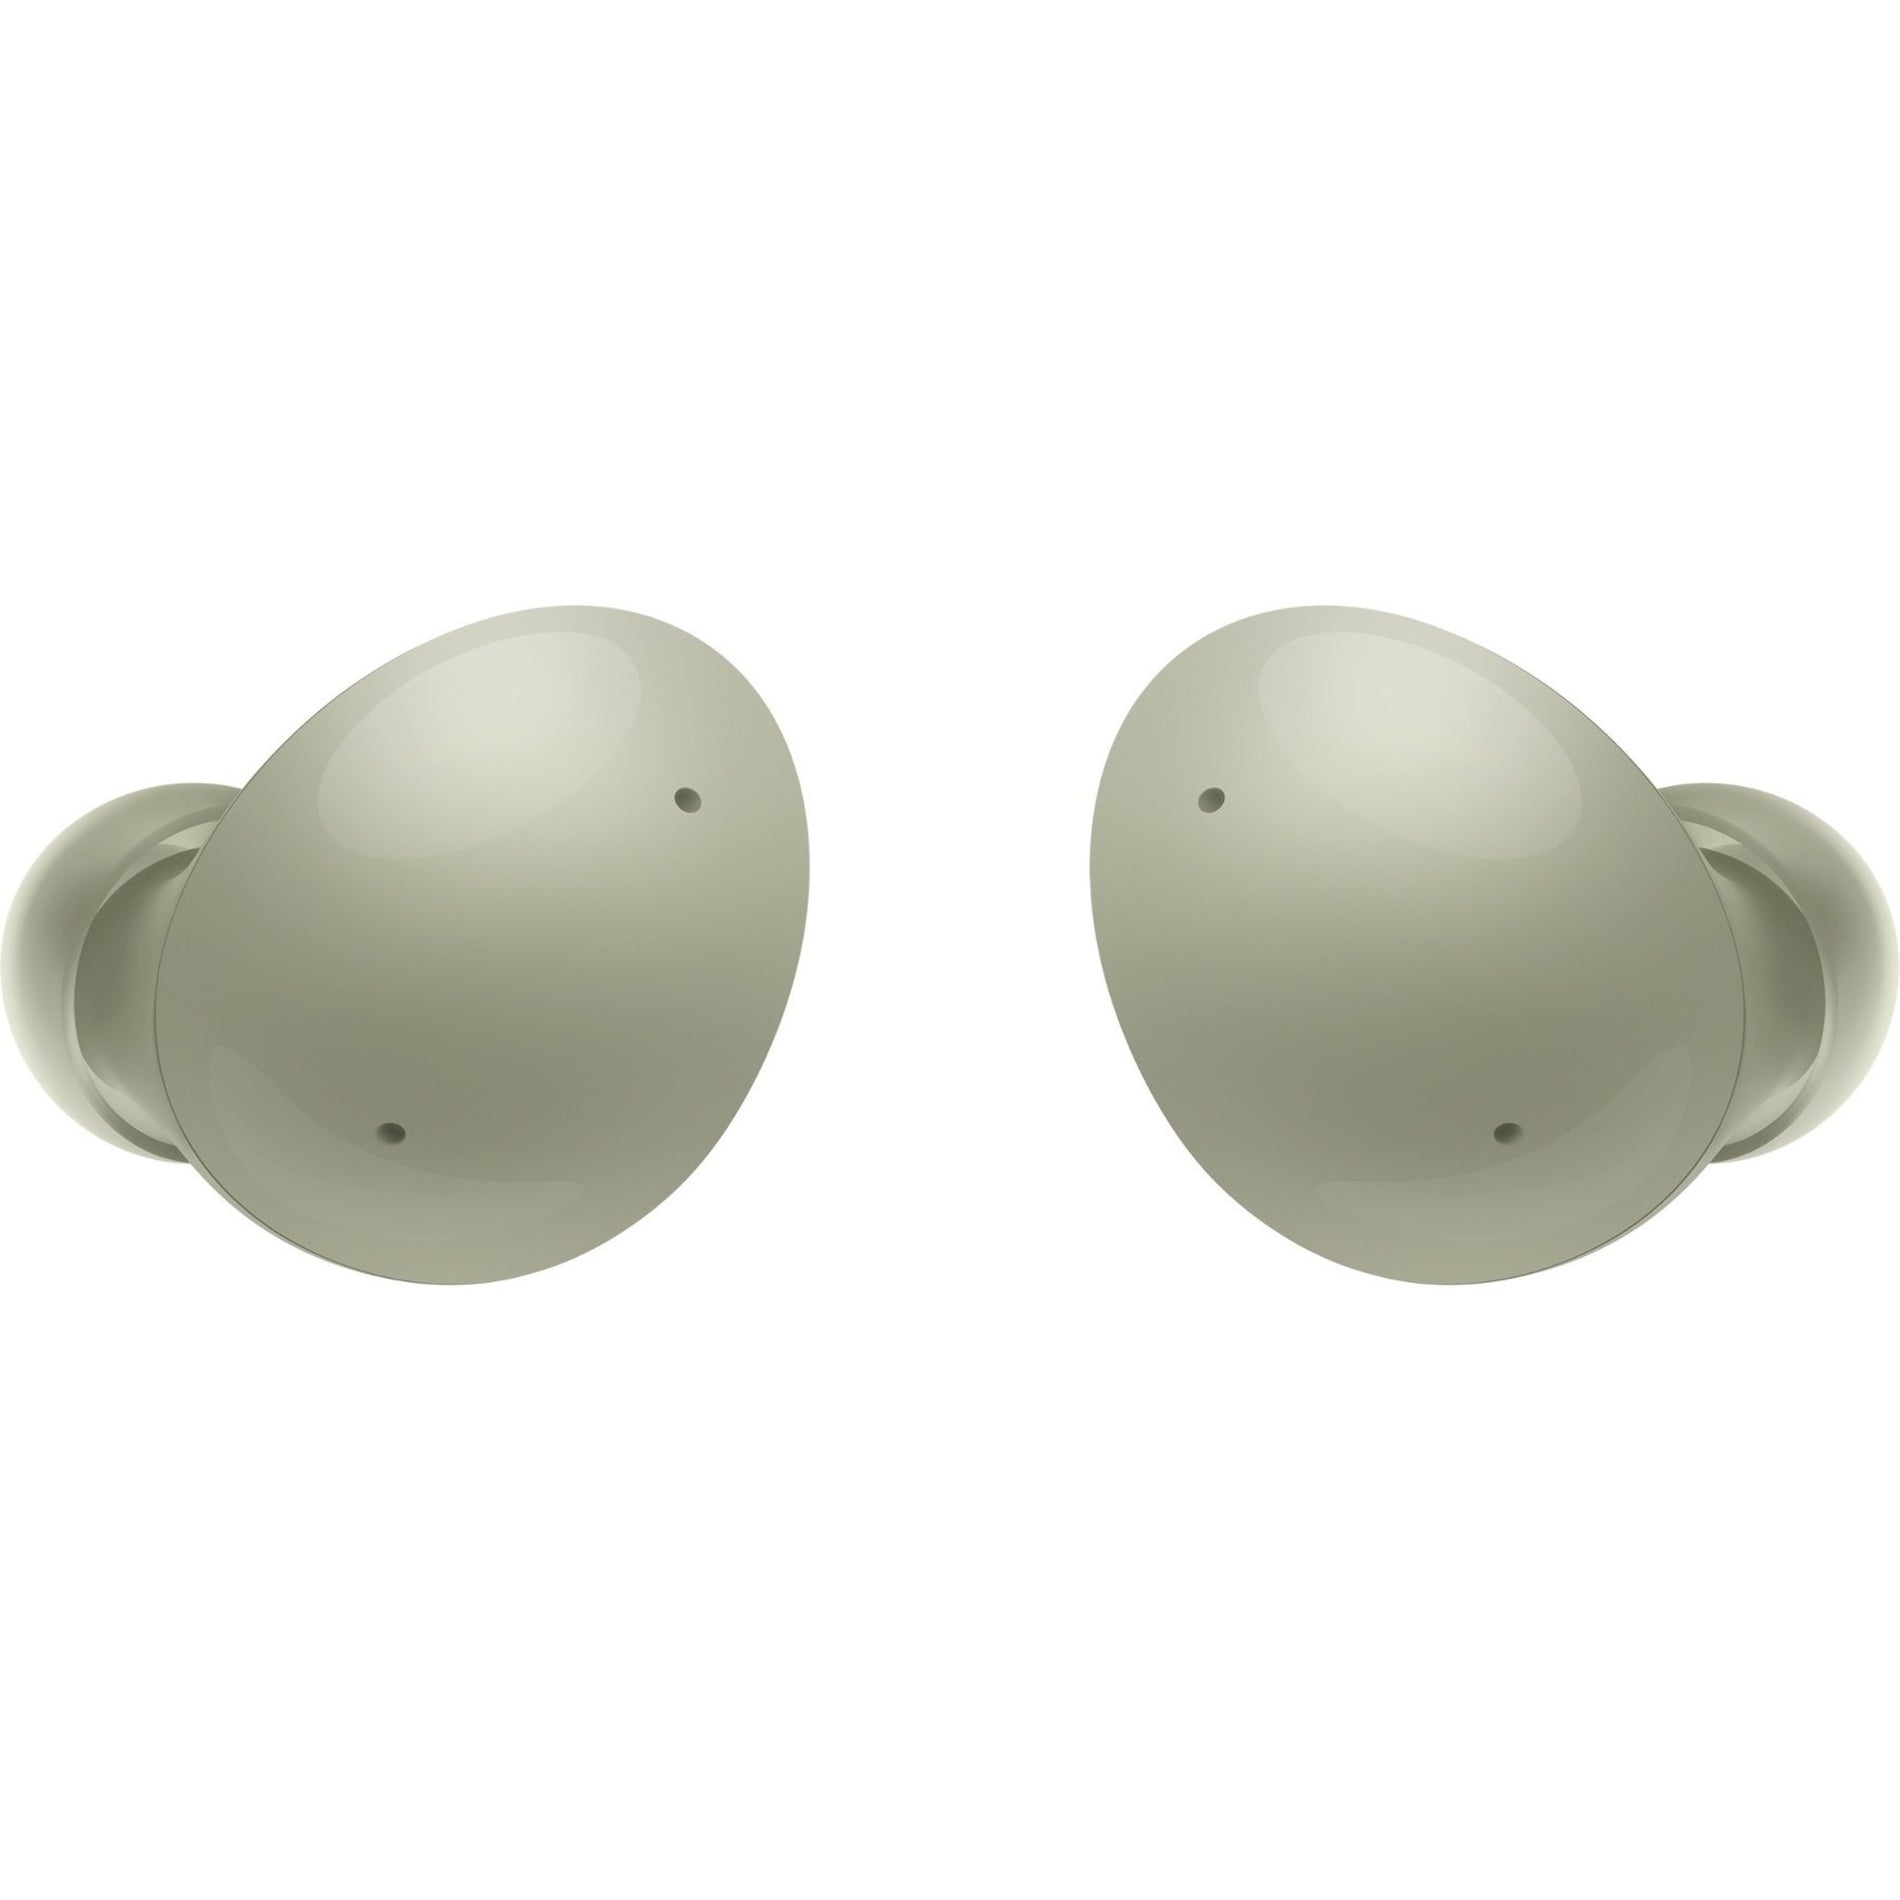 Samsung SM-R177NZGAXAR Galaxy Buds2, True Wireless Earbuds with Active Noise Canceling, Olive